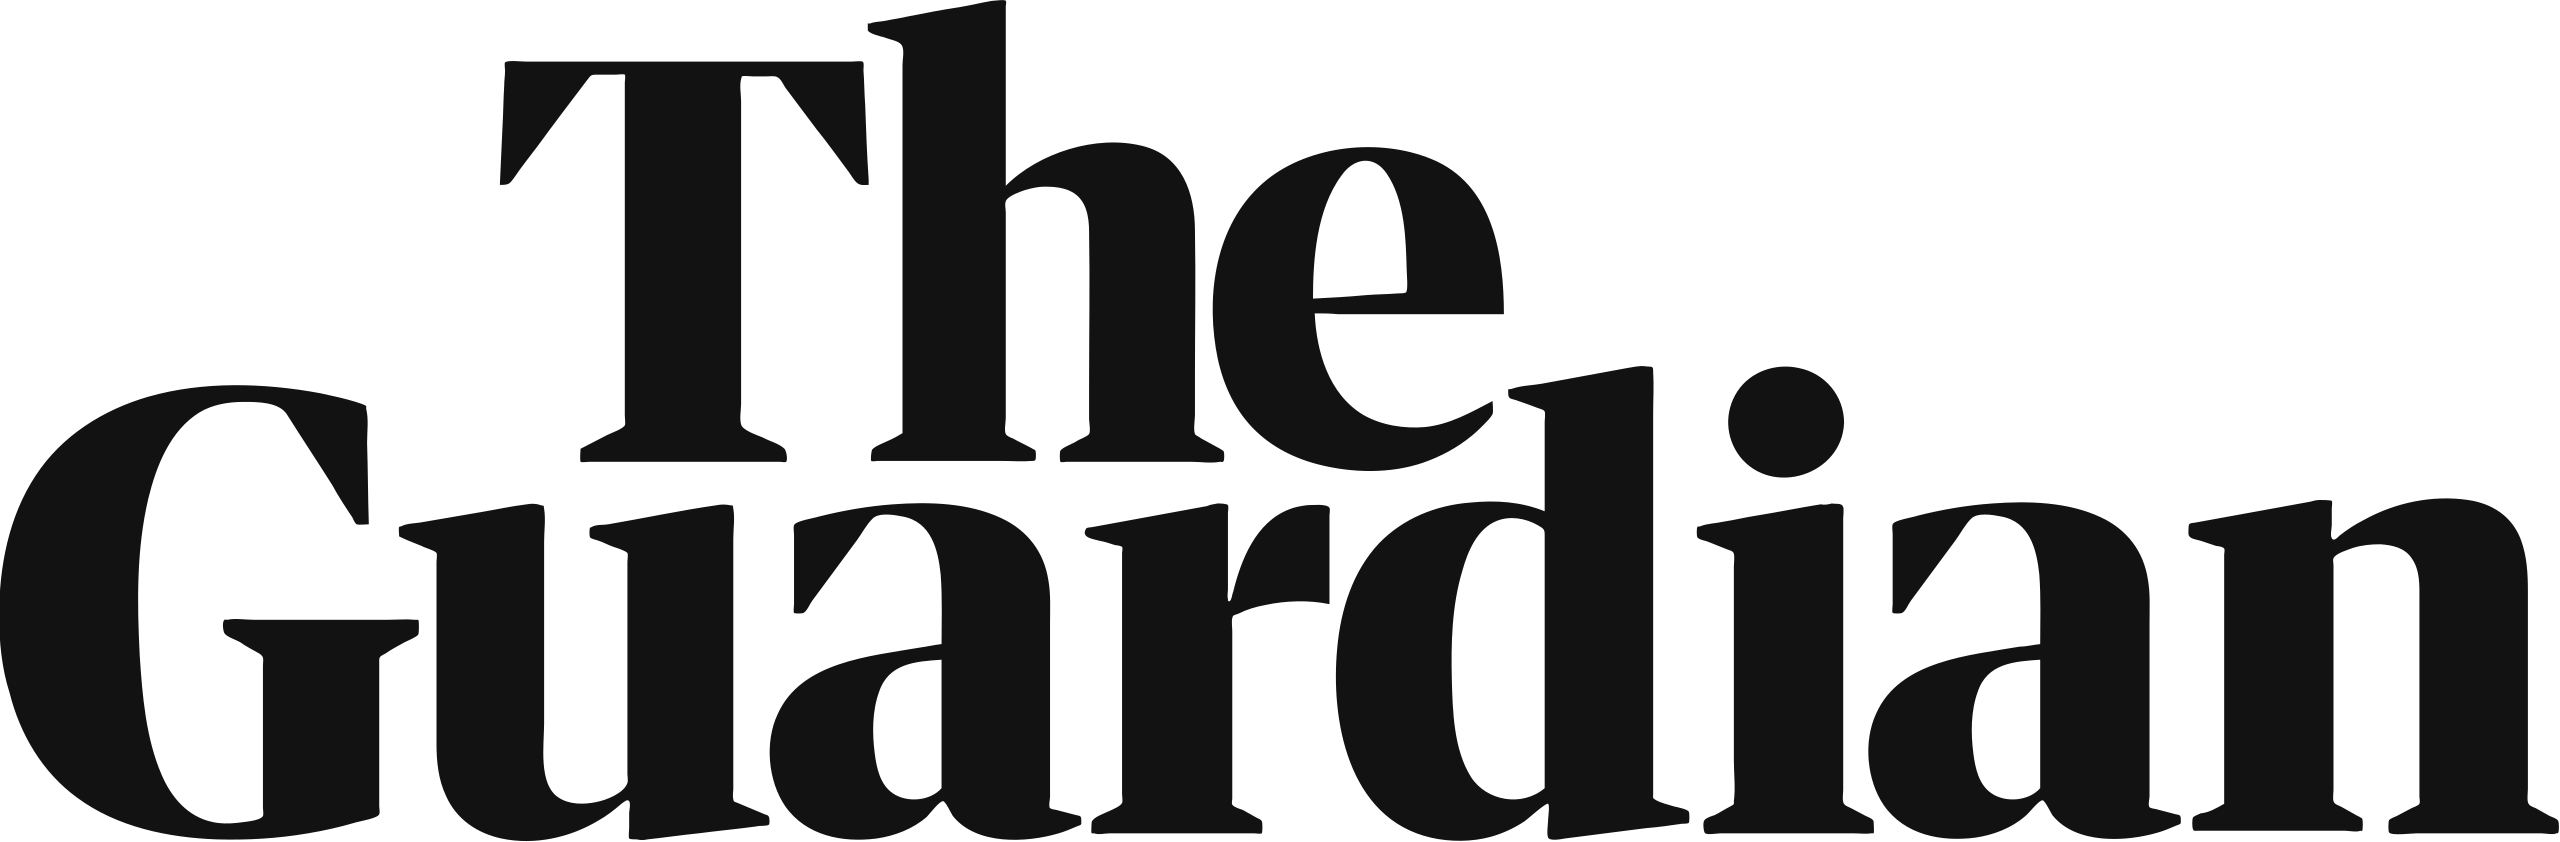 The Guardian 2018 svg